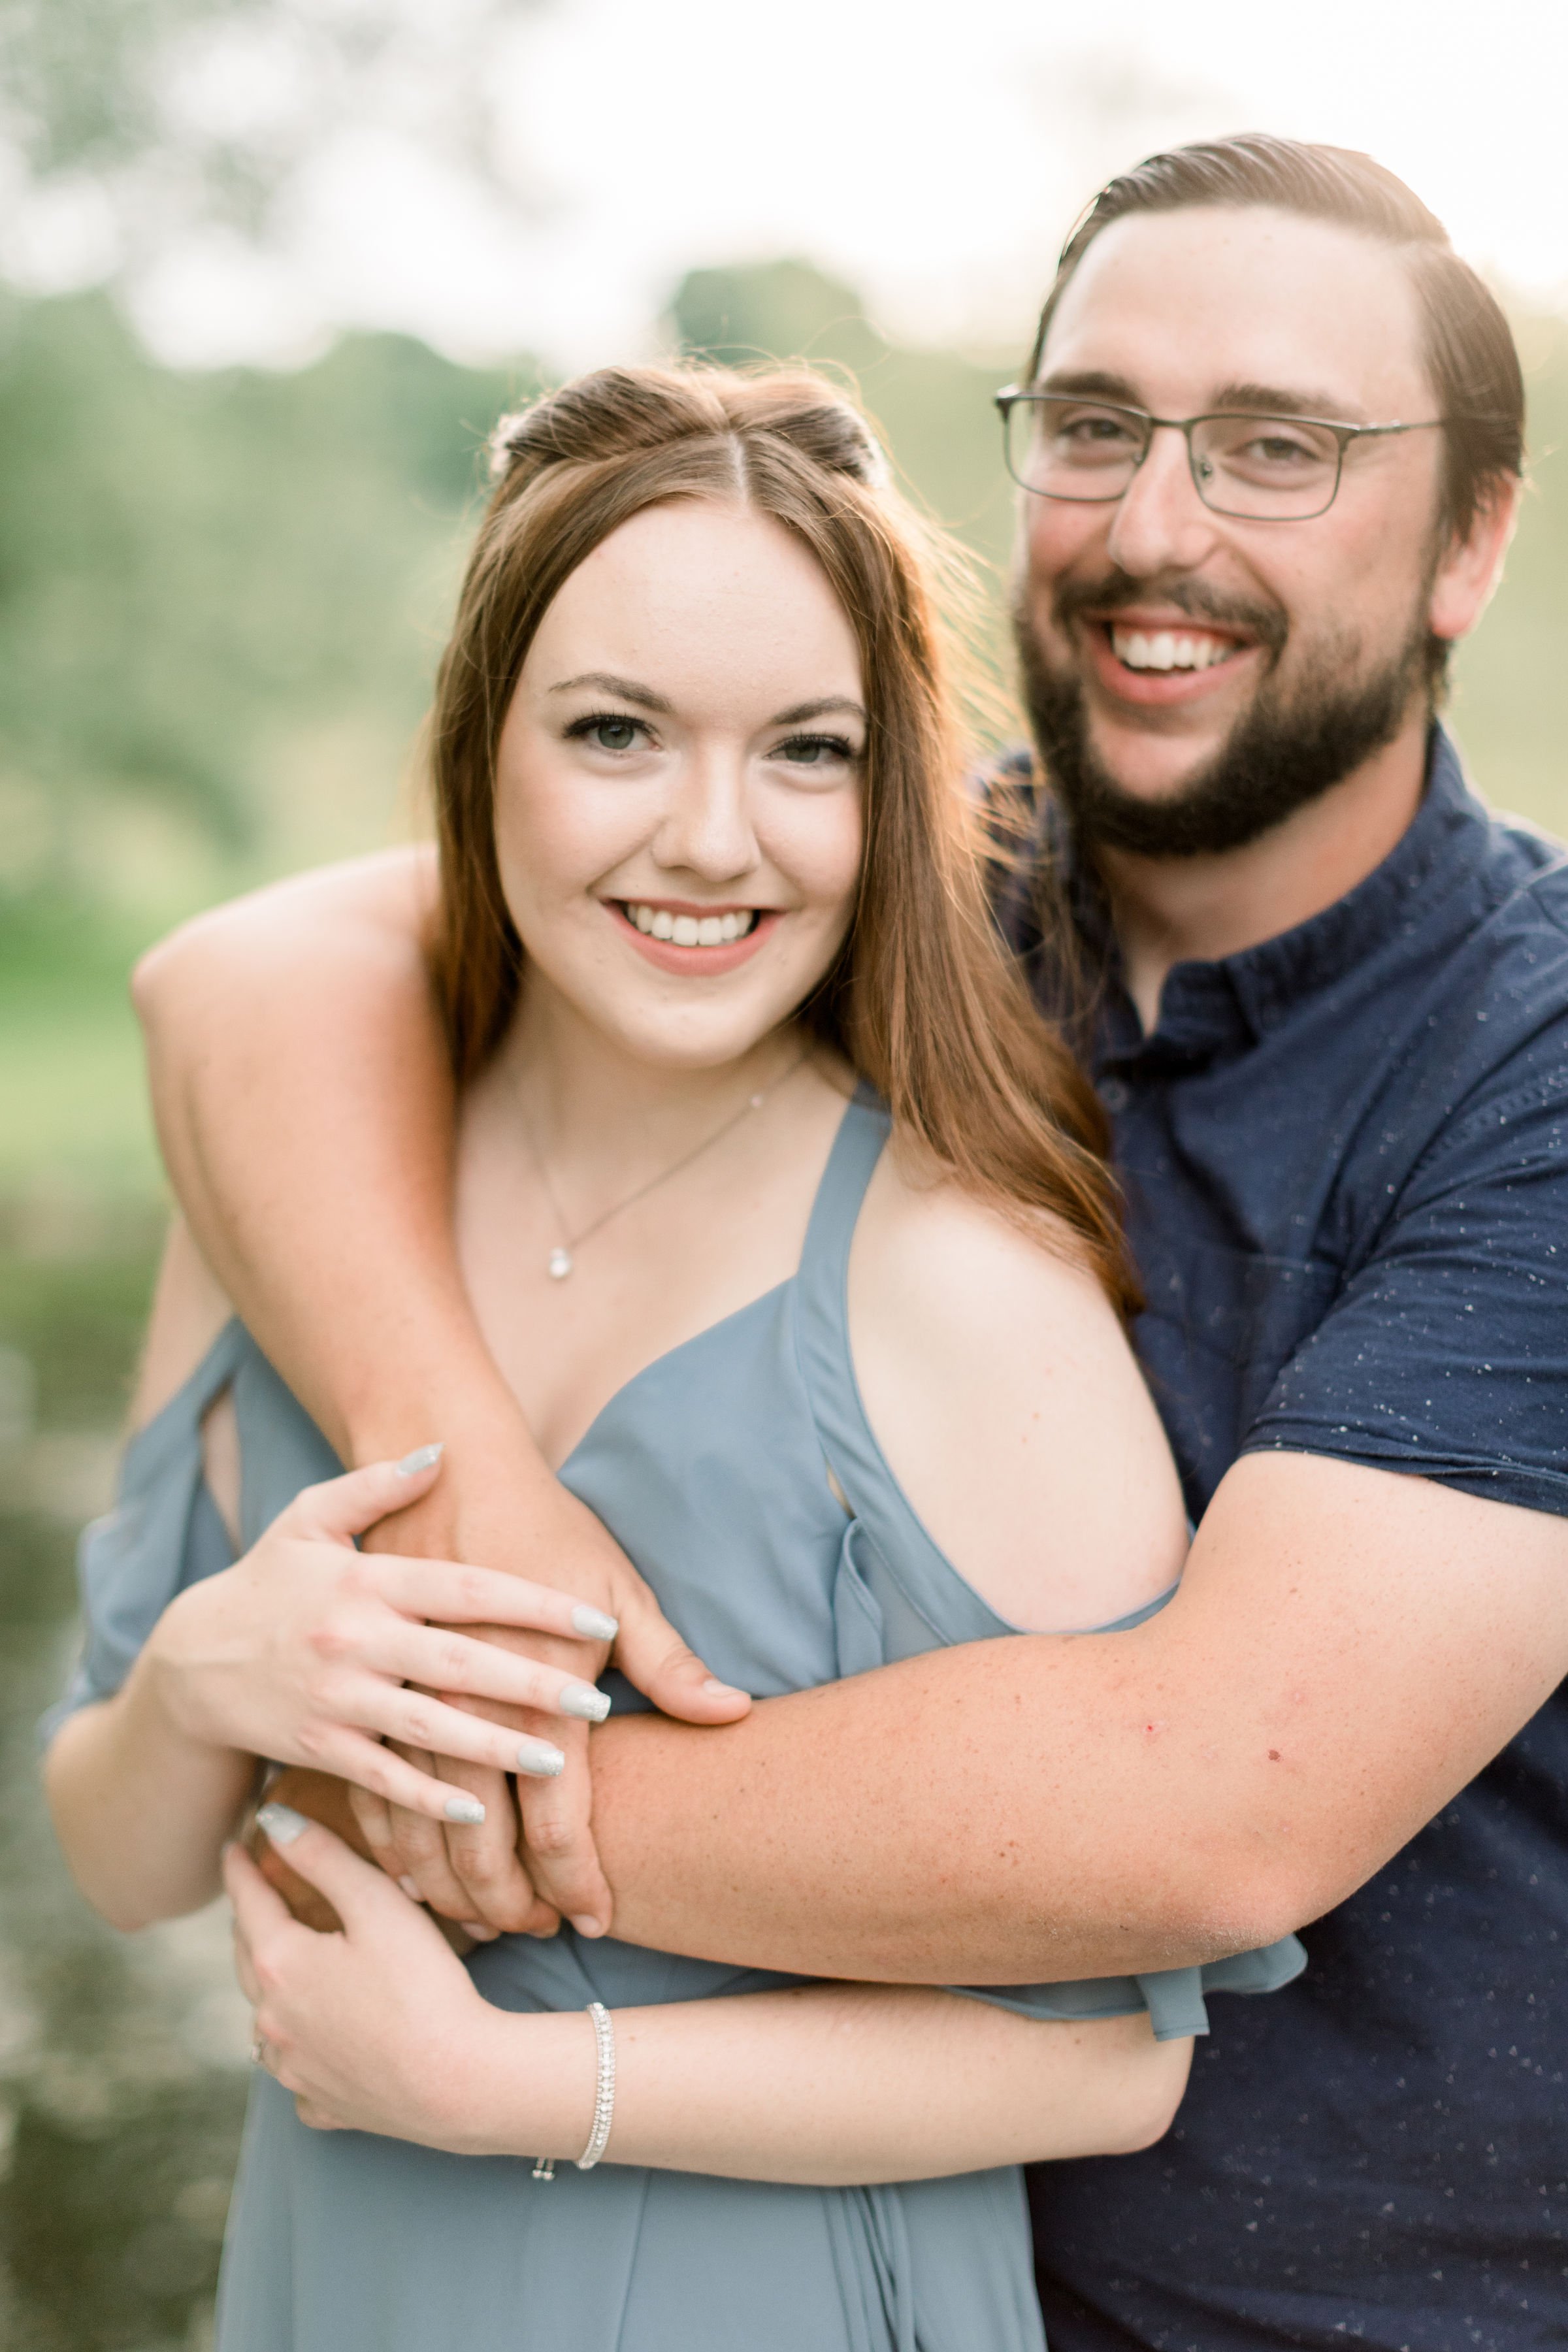  Chelsea Mason Photography captures a close-up portrait of an engaged couple in golden sunlight. close-up portrait engagements Ottawa photog #chelseamasonphotography #chelseamasonengagements #Ottawaengagements #DominonArboretum #Ottawaphotographers&n